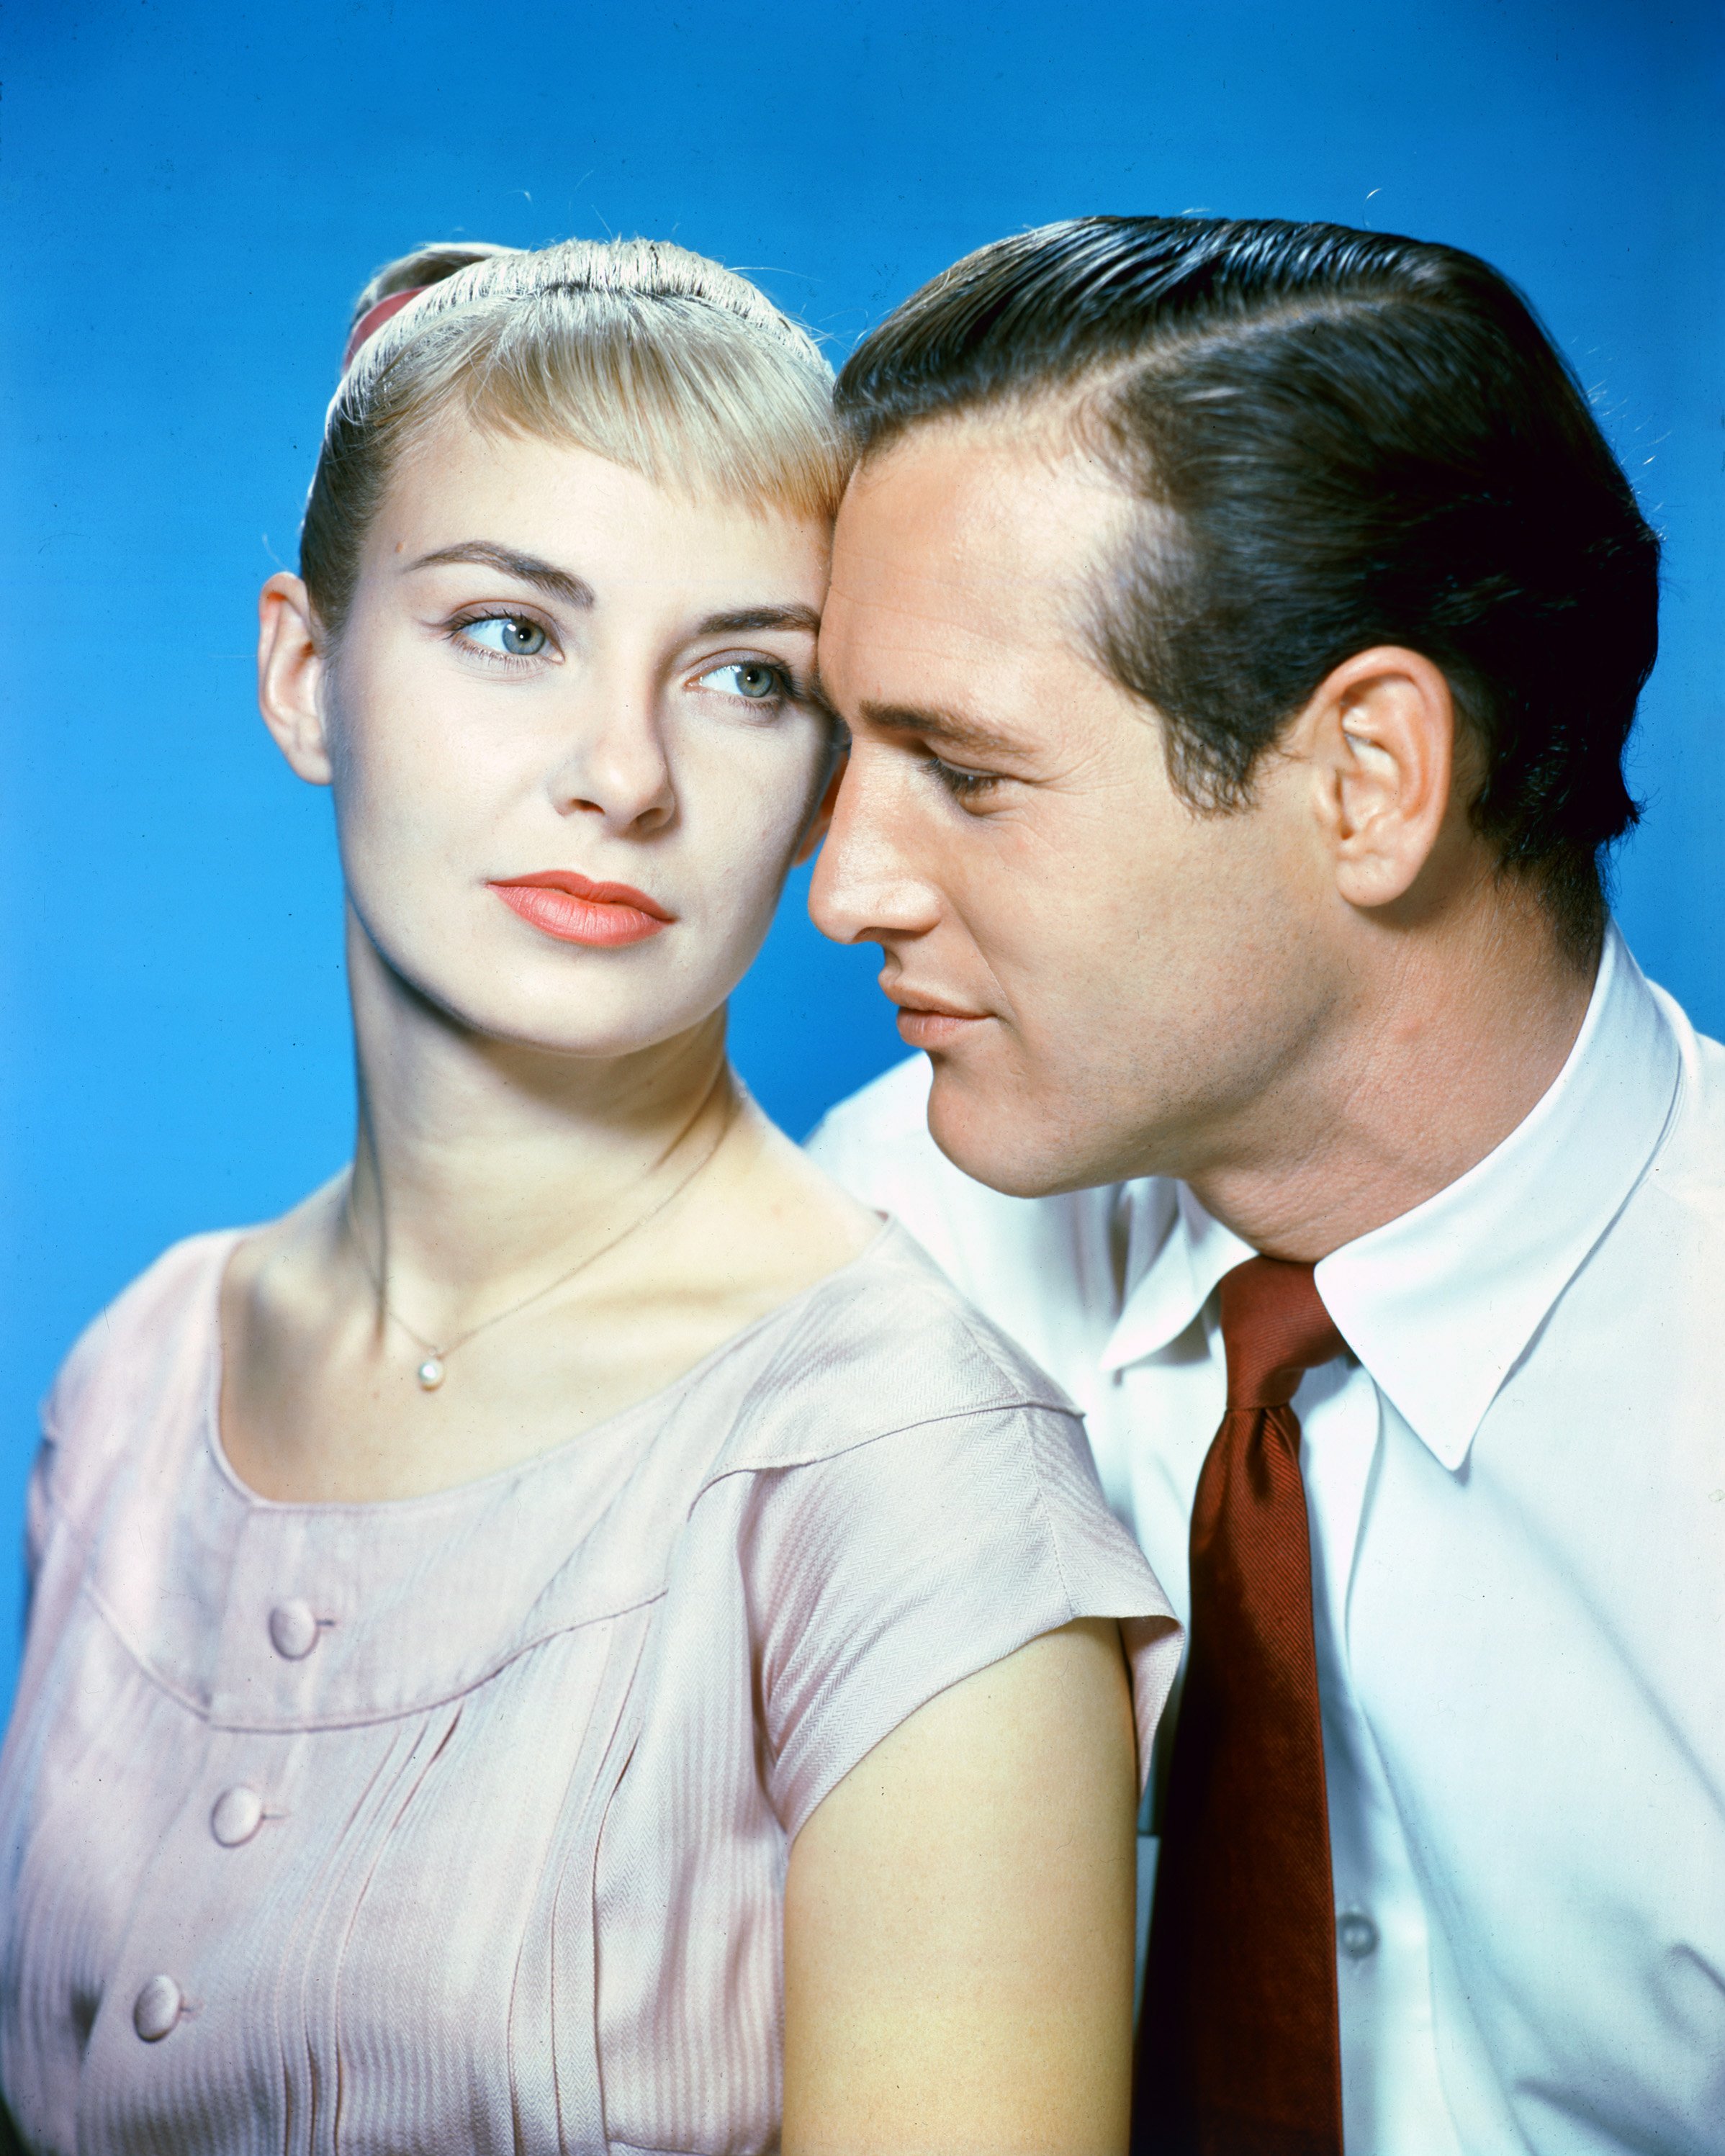 Joanne Woodward and Paul Newman's studio portrait for the film "The Long, Hot Summer" in 1958 | Source: Getty Images